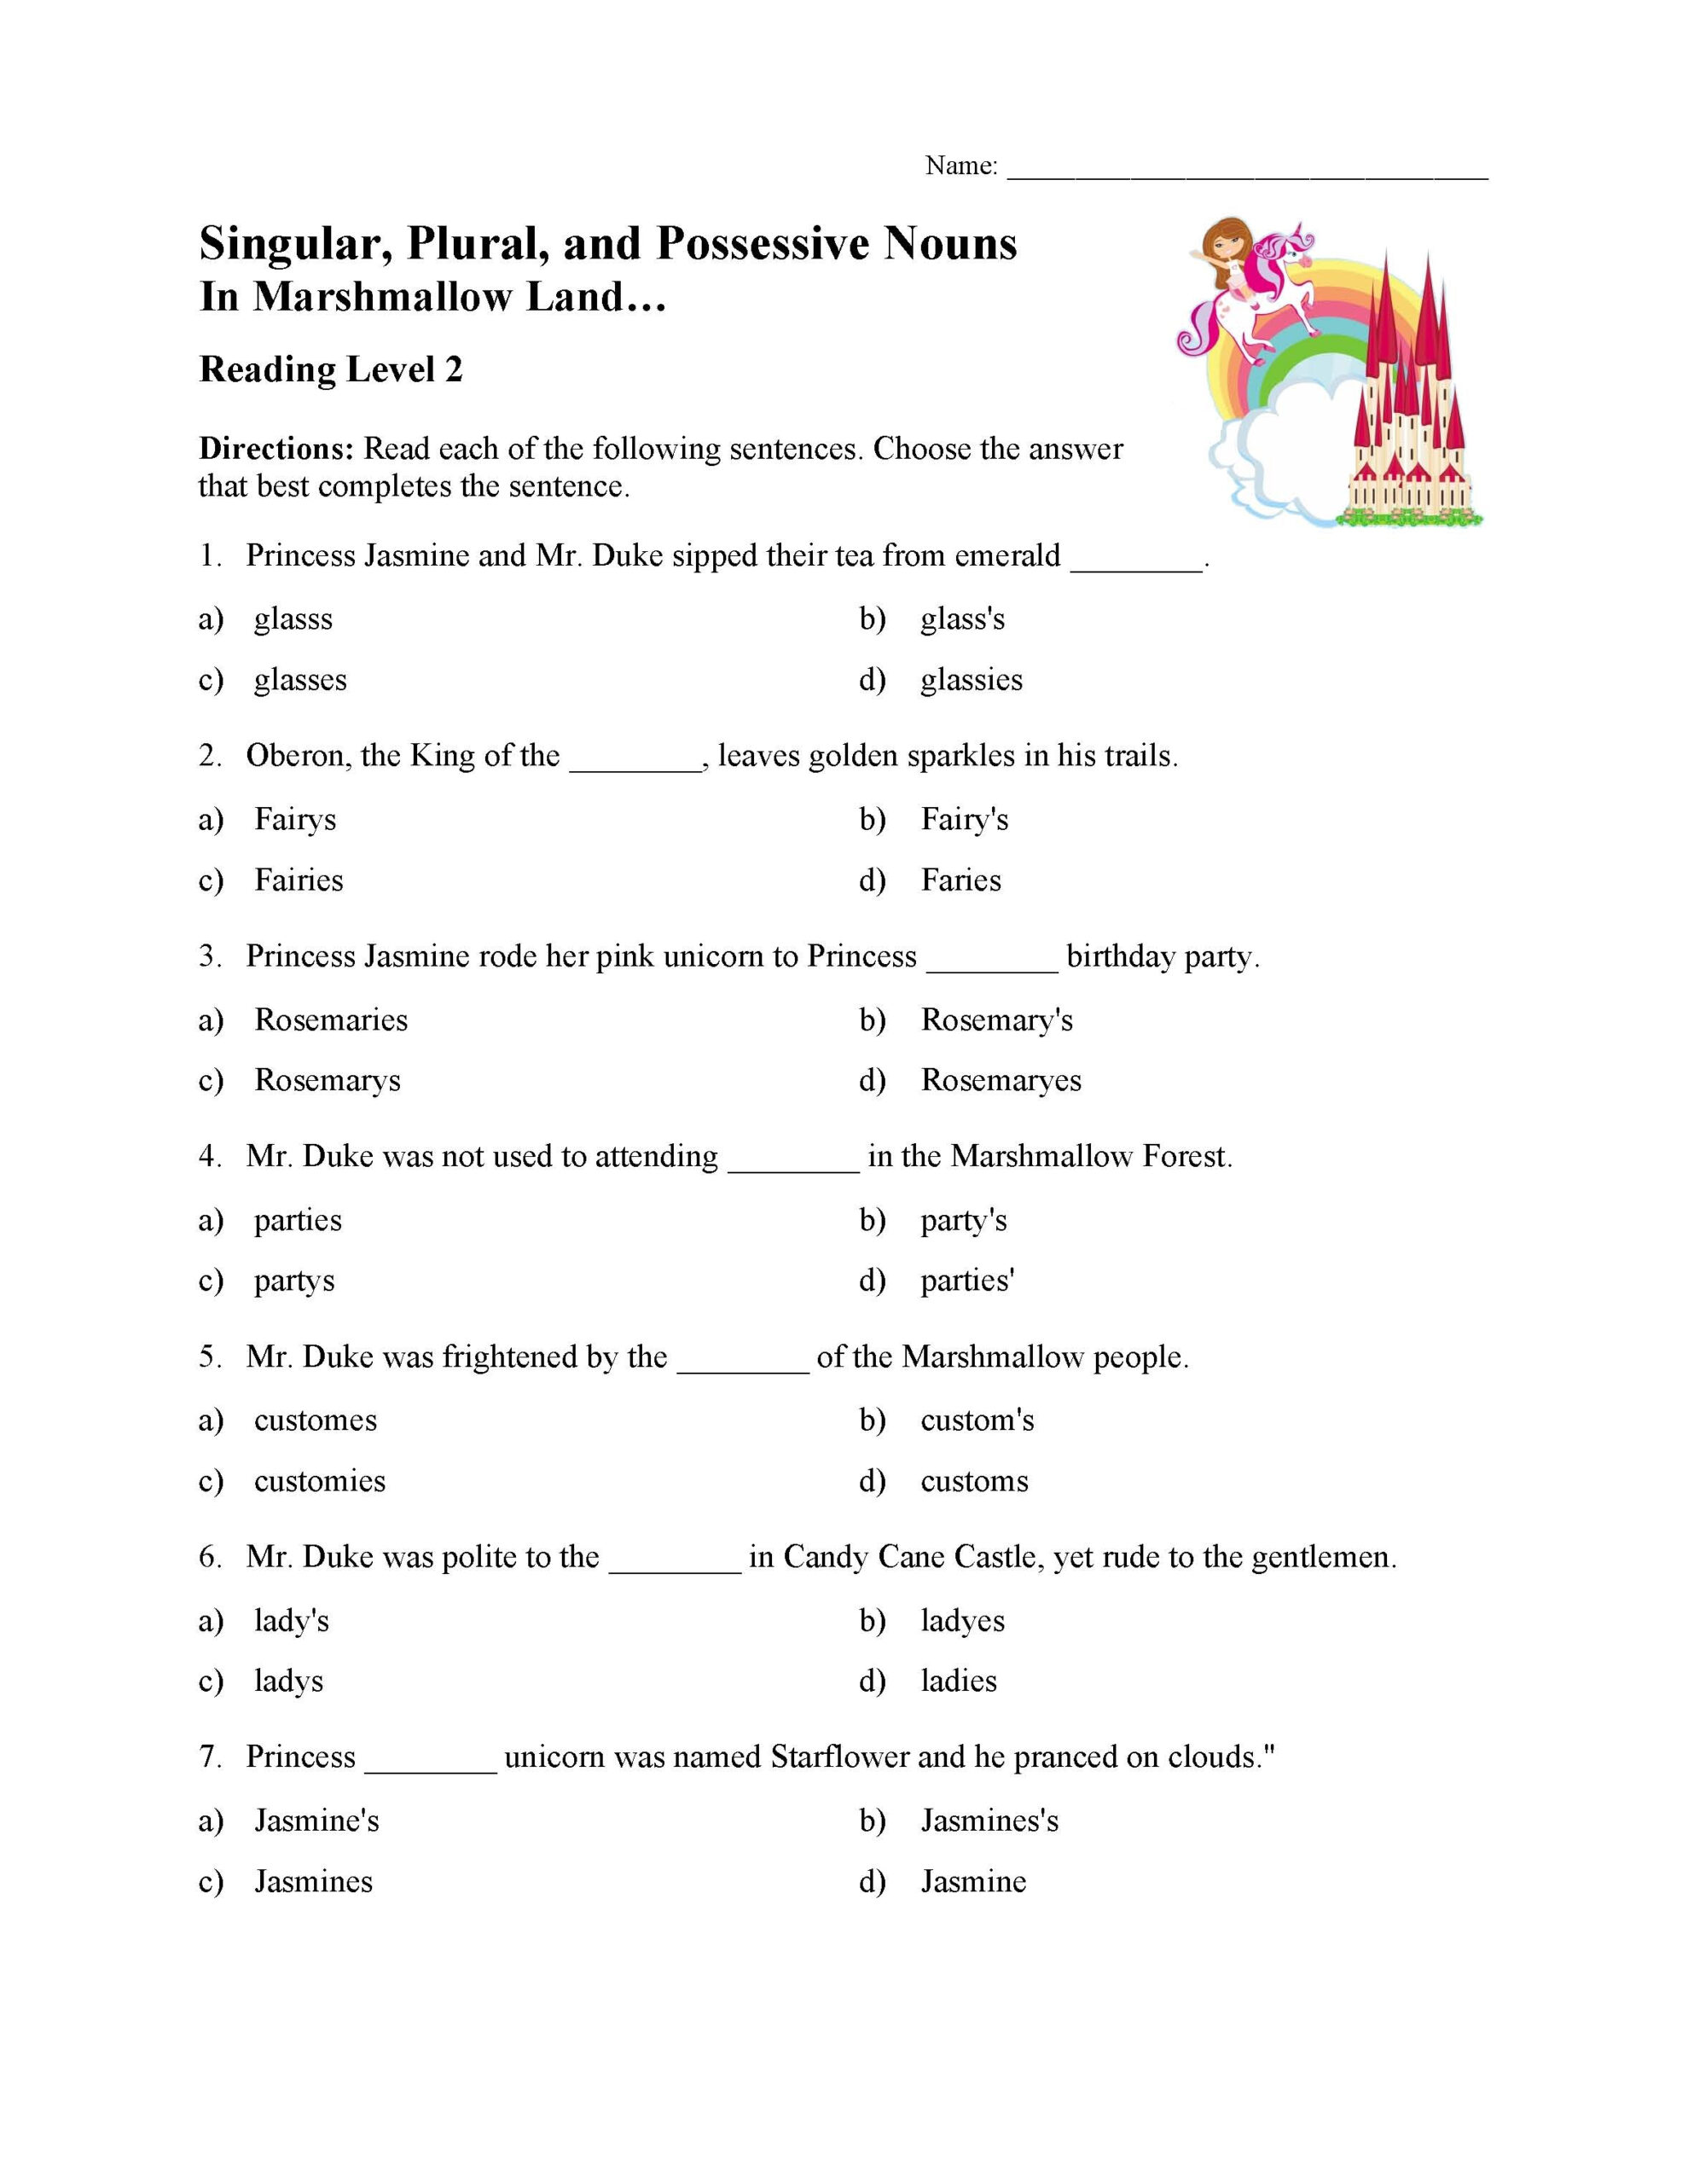 Singular Plural And Possessive Nouns Test 1 Reading Level 2 Preview